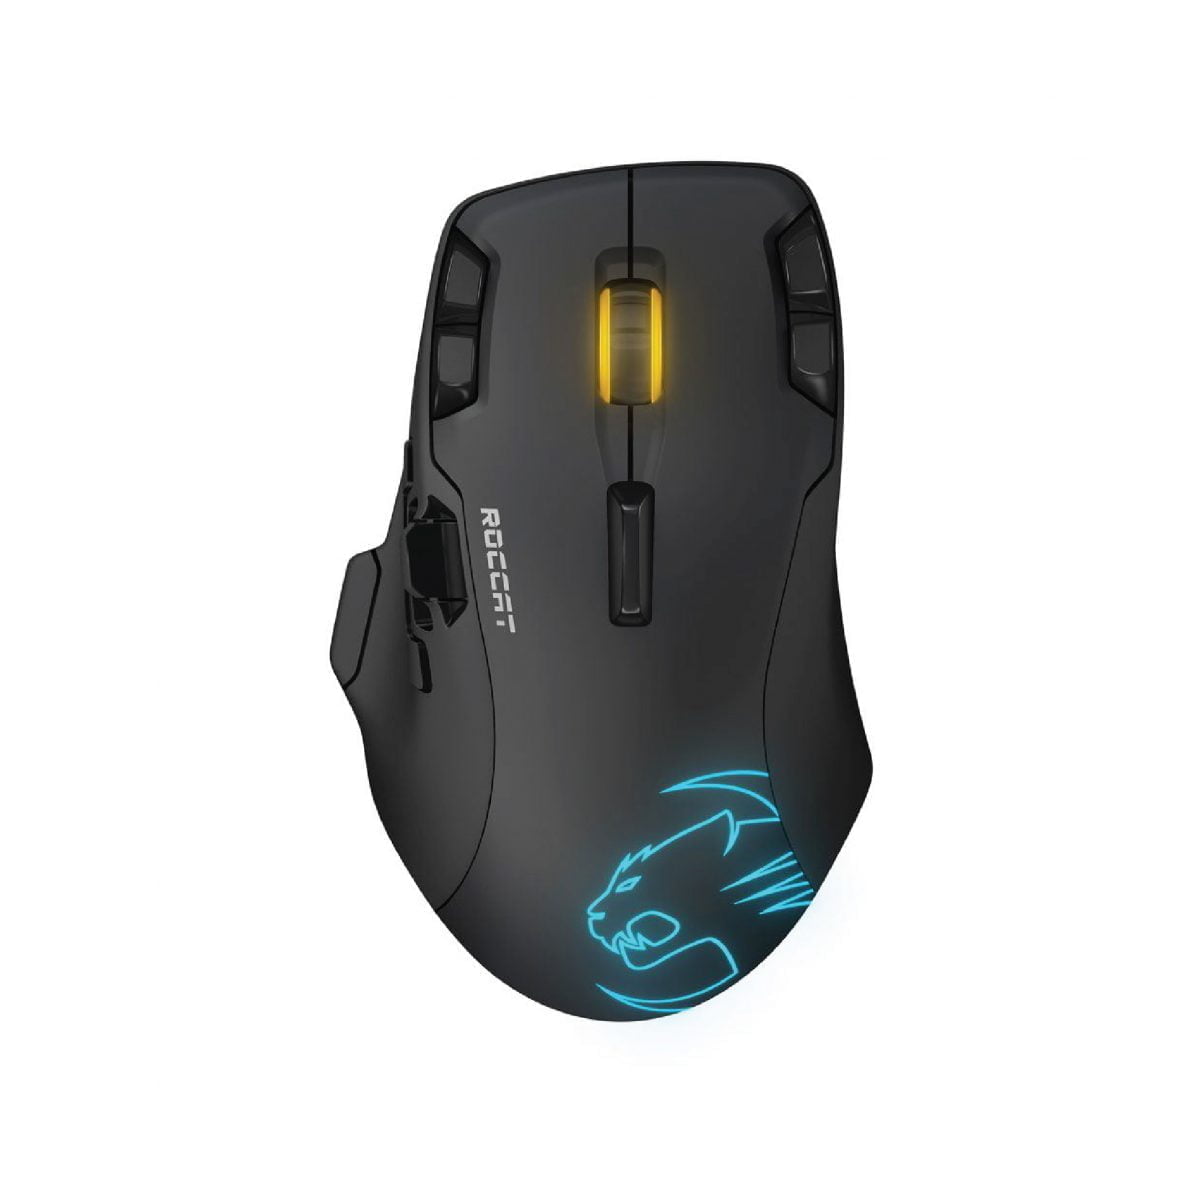 Mouse 11 Roccat &Lt;P Class=&Quot;Copytext&Quot;&Gt;&Lt;Span Style=&Quot;Color: #000000;&Quot;&Gt;What Sets The Leadr Apart From Its Competitors Is Its Pioneering Wireless Technology. Leadr Was Developed With A View To Providing Gamers With A Wireless Mouse That Performed Just As Well As A Wired One. With 1000Hz Polling And 2.4Ghz Data Transmission – Faster Than Usb – It Boasts Zero Lag And Virtually Latency, For Lightning-Fast Input. This Technology Is Complemented By The Pioneering Roccat® Owl-Eye Optical Sensor, Which Is Optimized For Wireless. Other Wireless Mice Make Sacrifices By Using Power-Saving Modes But Owl-Eye Uses Full Power All The Time, Bringing The Feeling Of Wired To Wireless.&Lt;/Span&Gt;&Lt;/P&Gt; &Lt;B&Gt;We Also Provide International Wholesale And Retail Shipping To All Gcc Countries: Saudi Arabia, Qatar, Oman, Kuwait, Bahrain. &Lt;/B&Gt; Roccat Leadr Wireless Gaming Mouse Roccat Leadr Wireless Gaming Mouse, Black